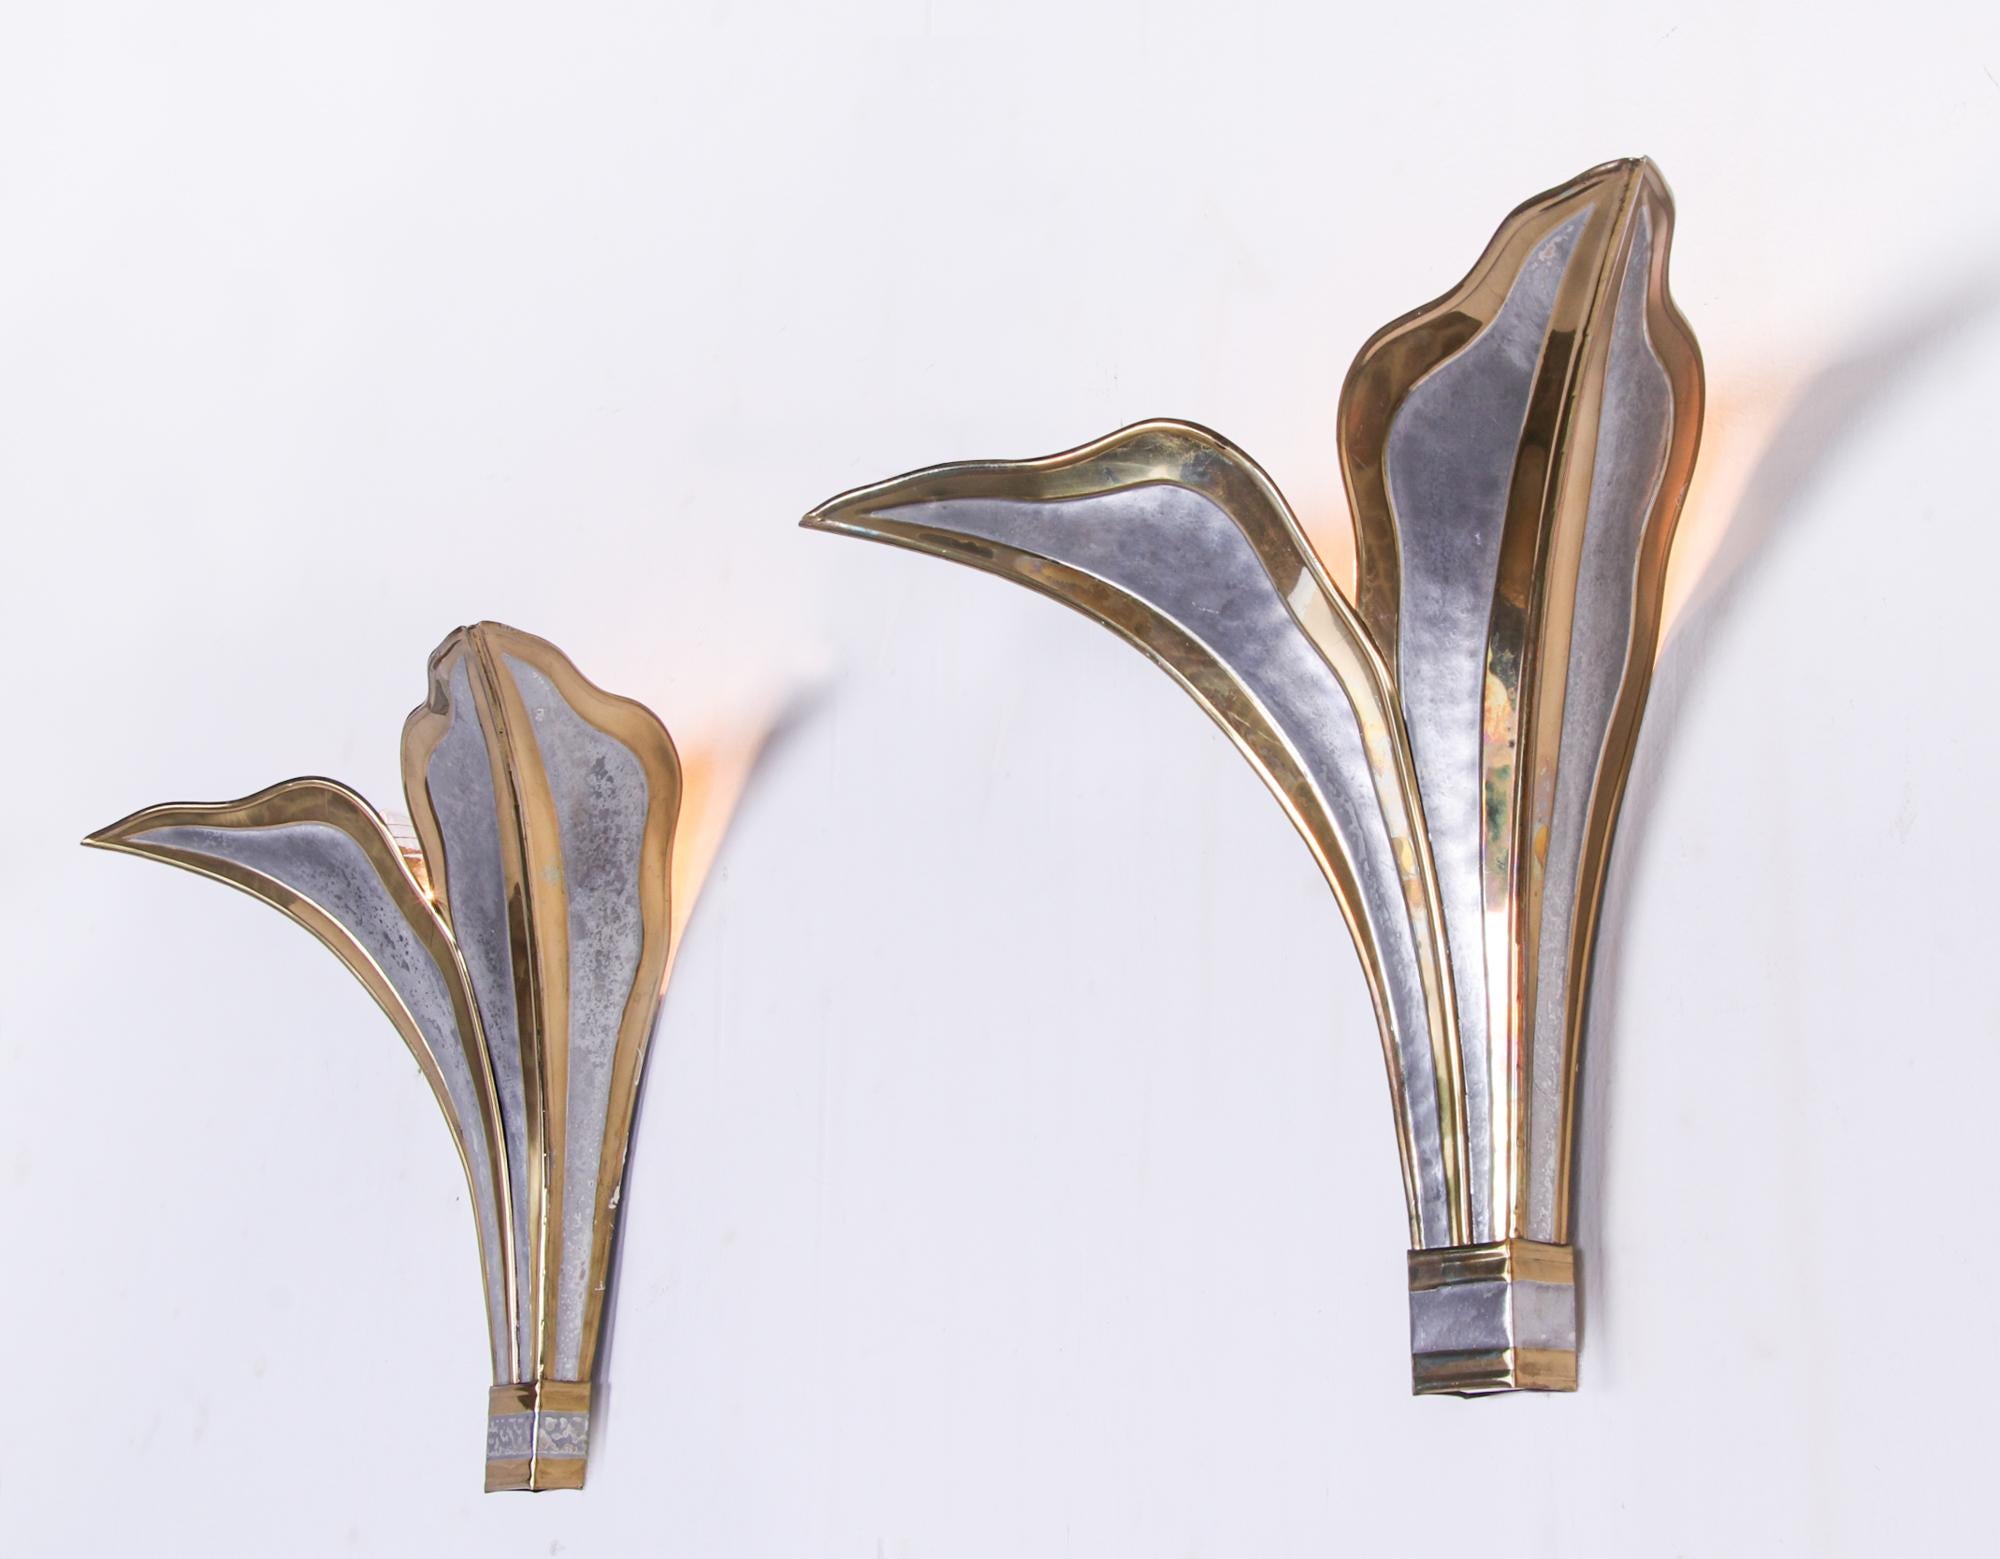 Elegant pair of leaf wall lamps in gold and silver handcrafted hammered brass designed by Henri Fernandez for Maison Honoré in Paris, France, 1970s. These extraordinary lights have an incomparable unique character, a touch of luxury fills the room.